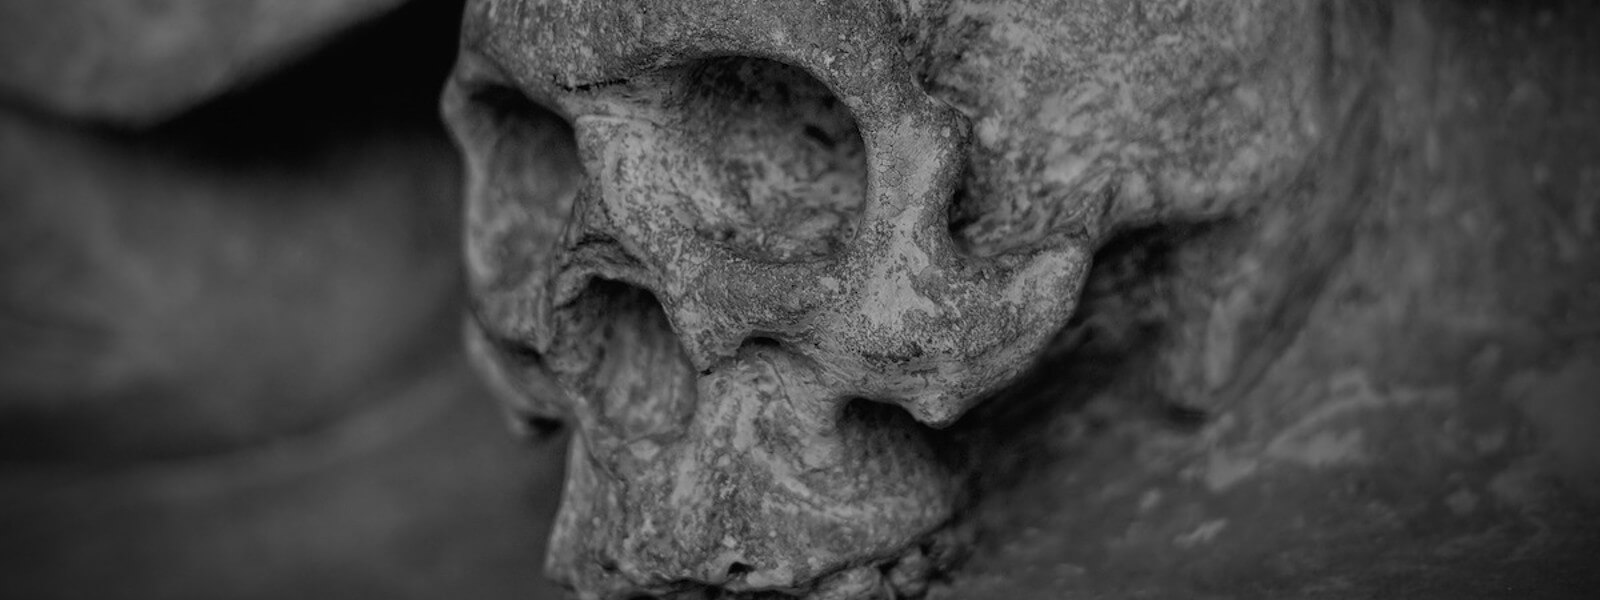 A human skull turned to stone in black and white.